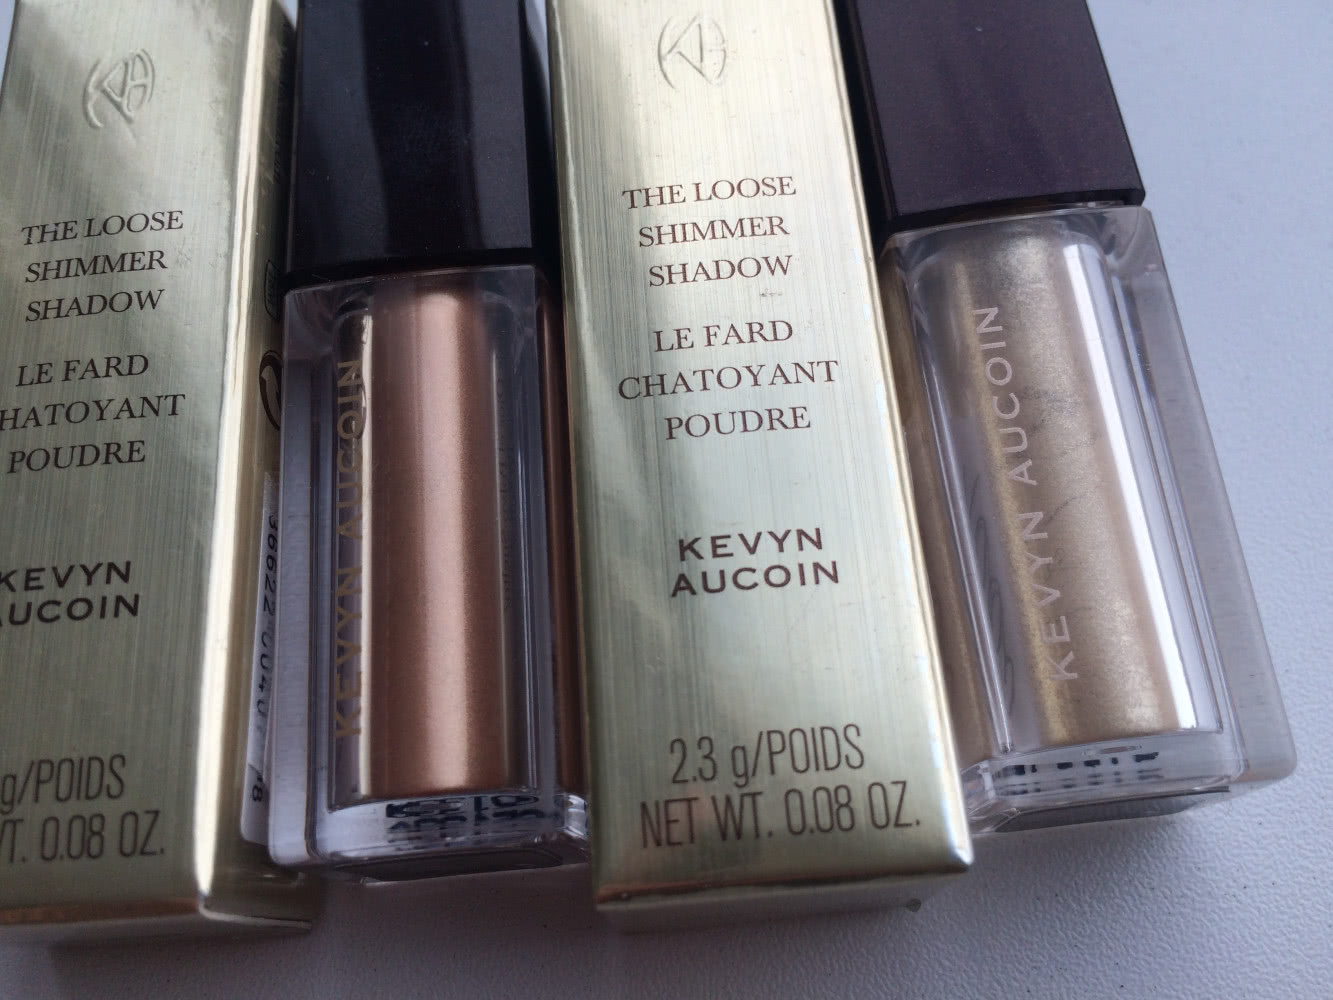 KEVYN AUCOIN The Loose Shimmer Shadow